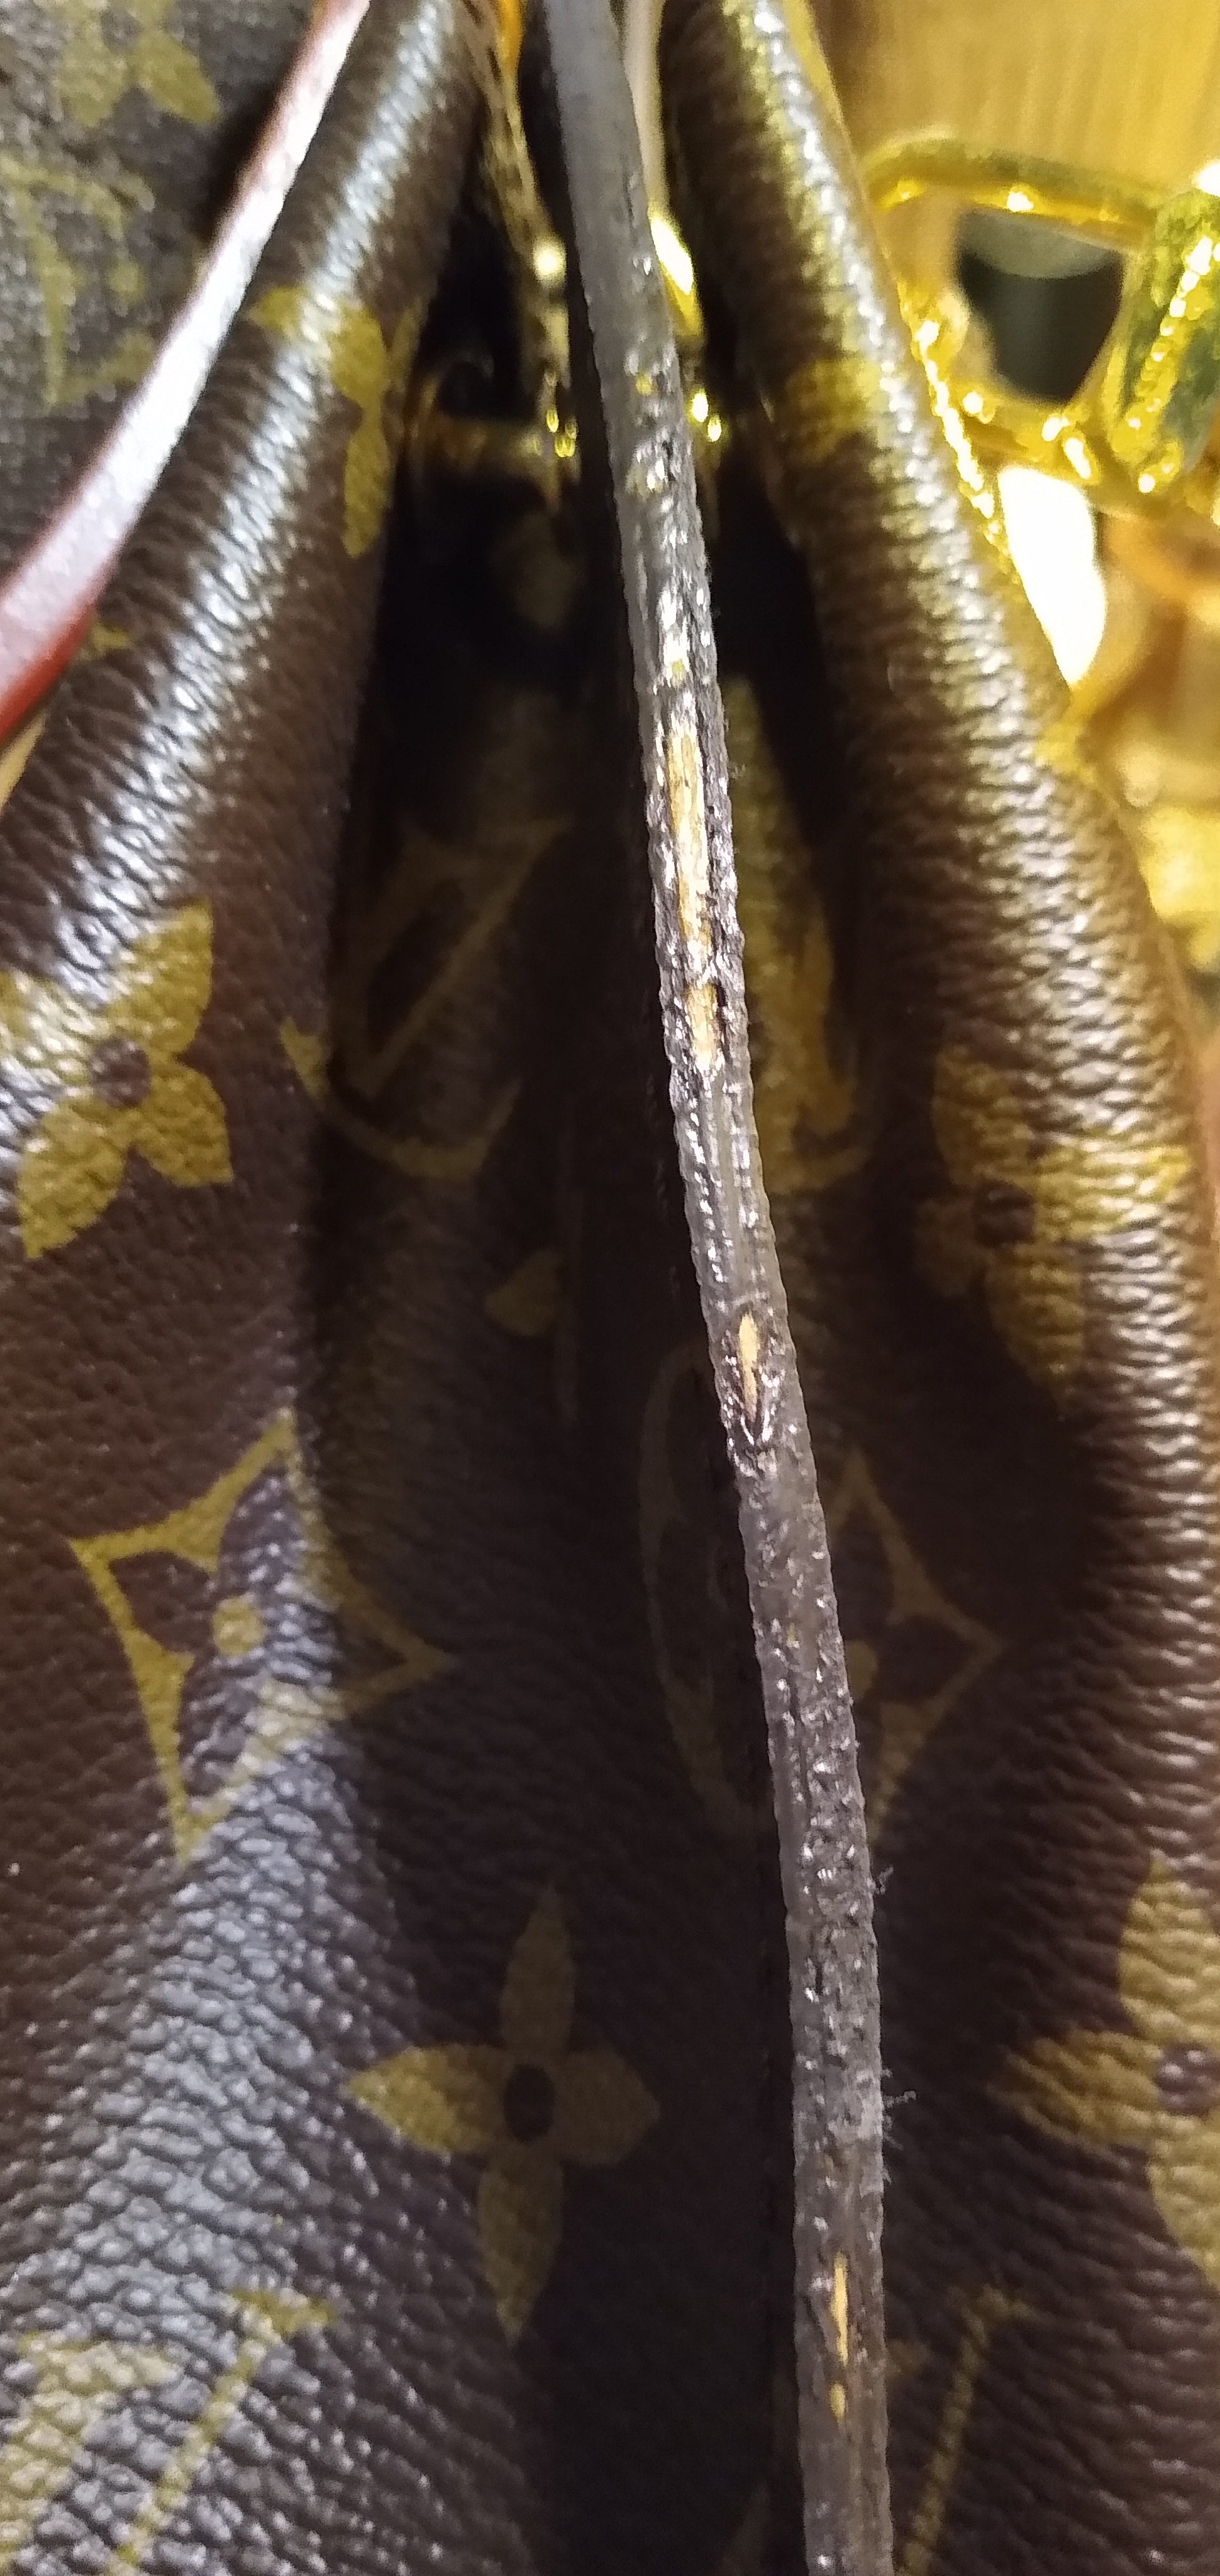 QC LV Belt - I made the mistake of purchasing this before looking into good  sellers and such. My question is I know it's a fake obviously due to the  pattern, do